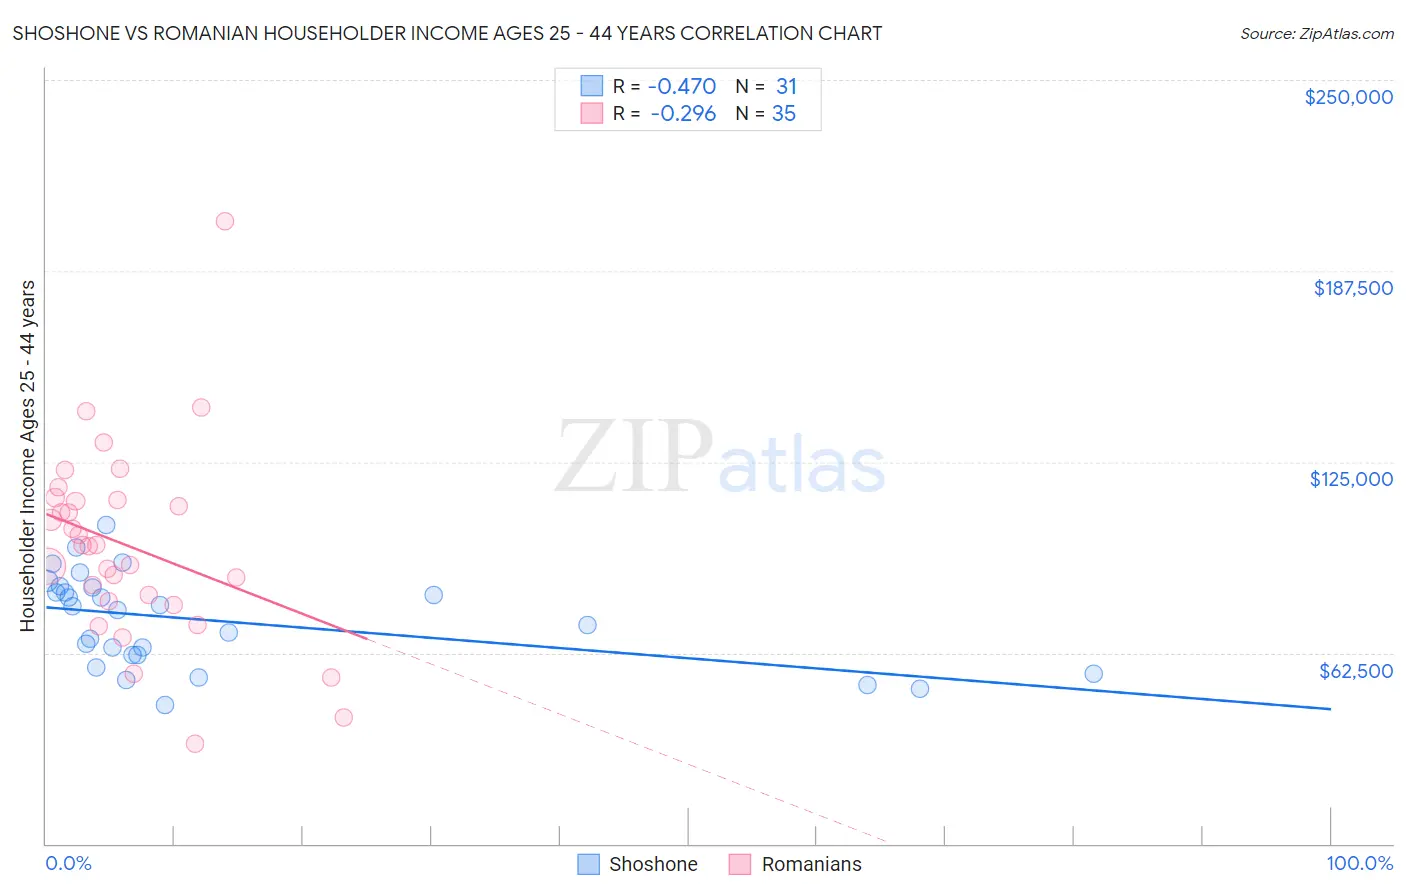 Shoshone vs Romanian Householder Income Ages 25 - 44 years